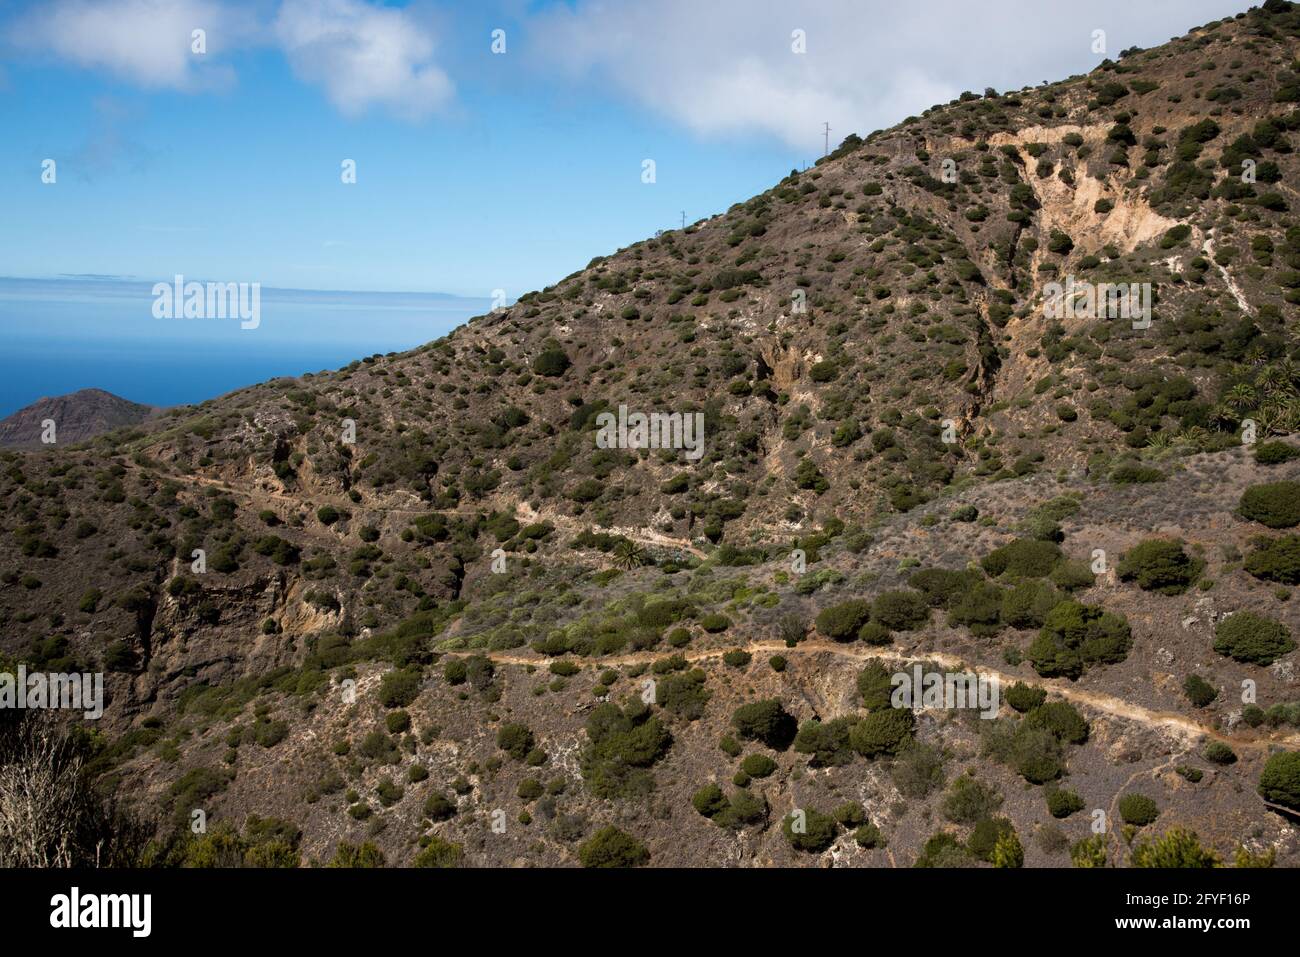 Dry vegetation in the Barranca Tazo in the northwest of La Gomera in the Canary Island. Stock Photo